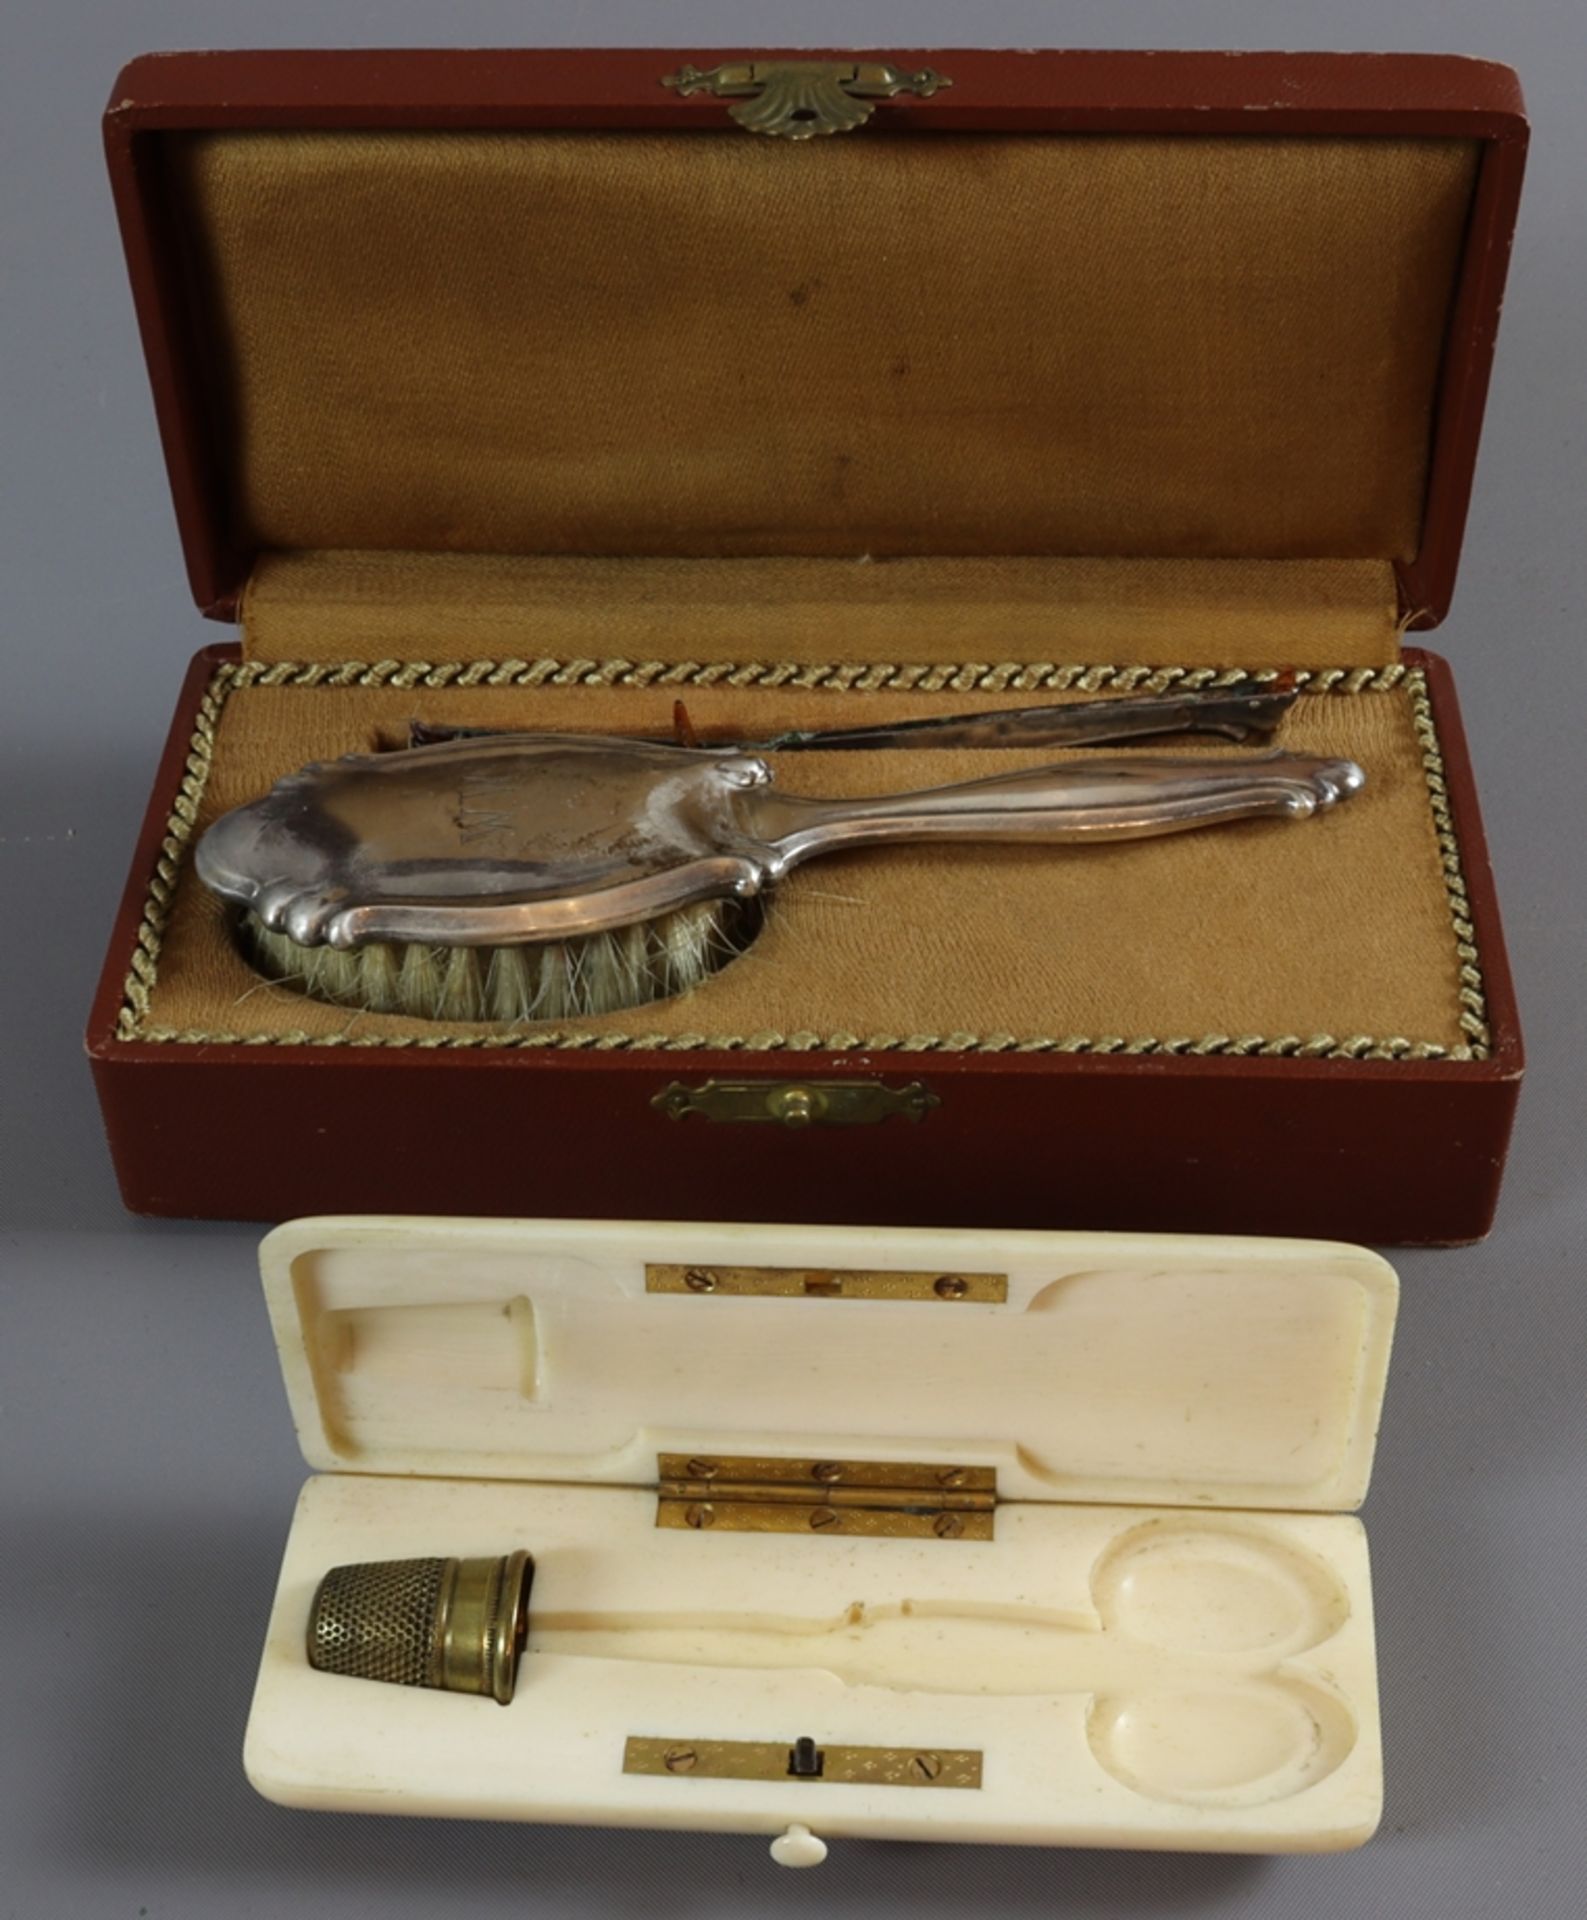 Brush and comb set and others, Historism circa 1900, German